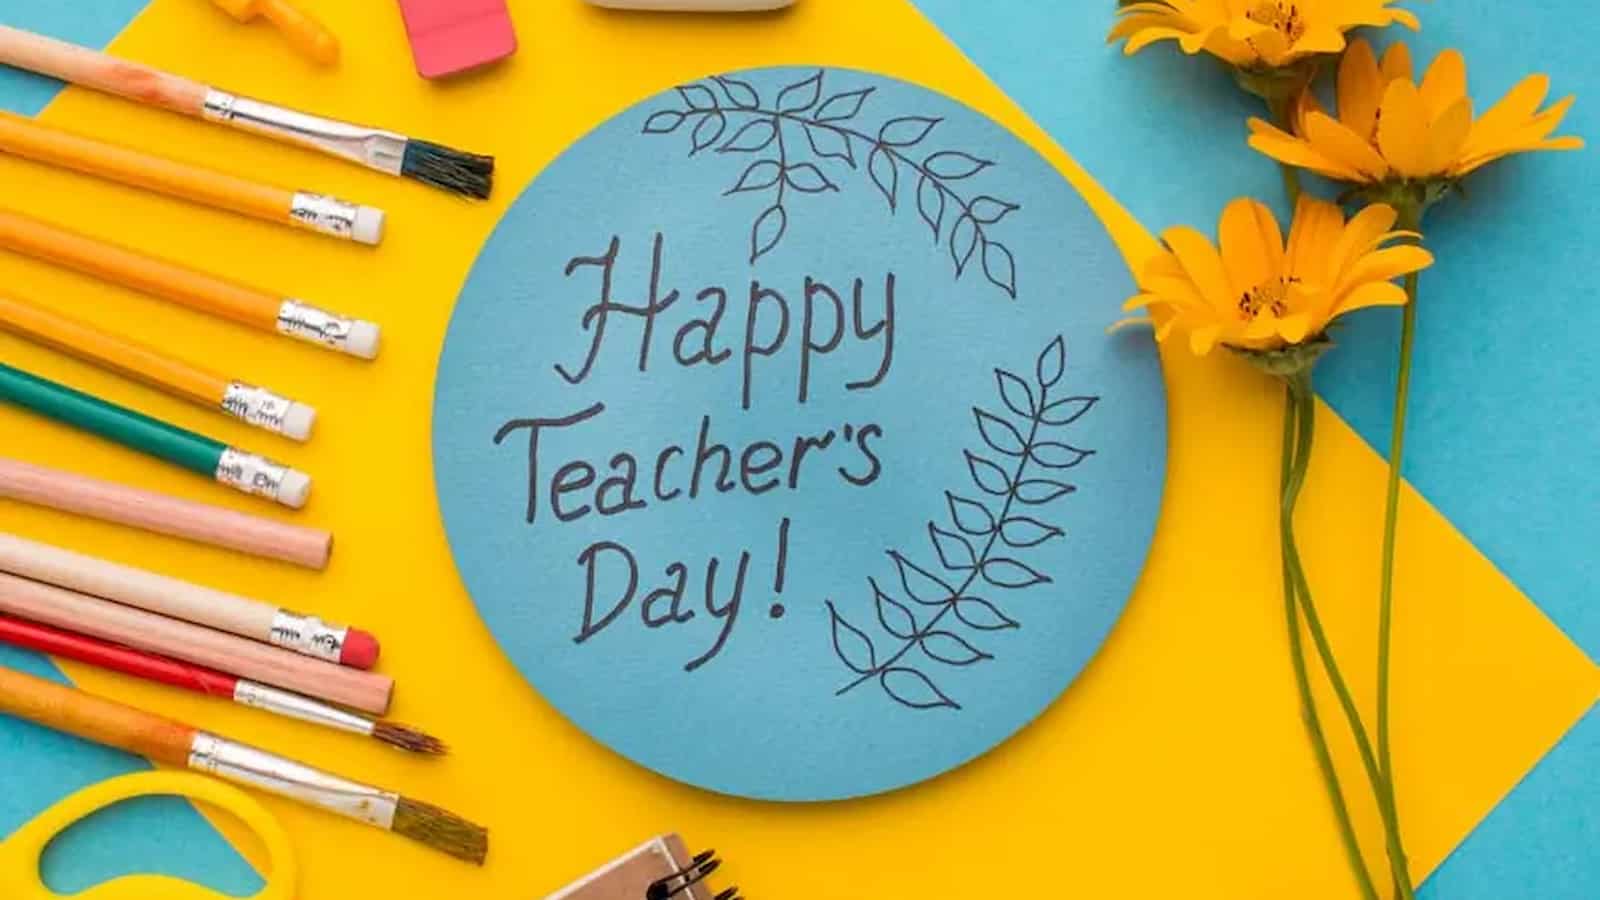 Happy Teachers' Day 2023 Wishes, Greetings and Messages to share with Teachers